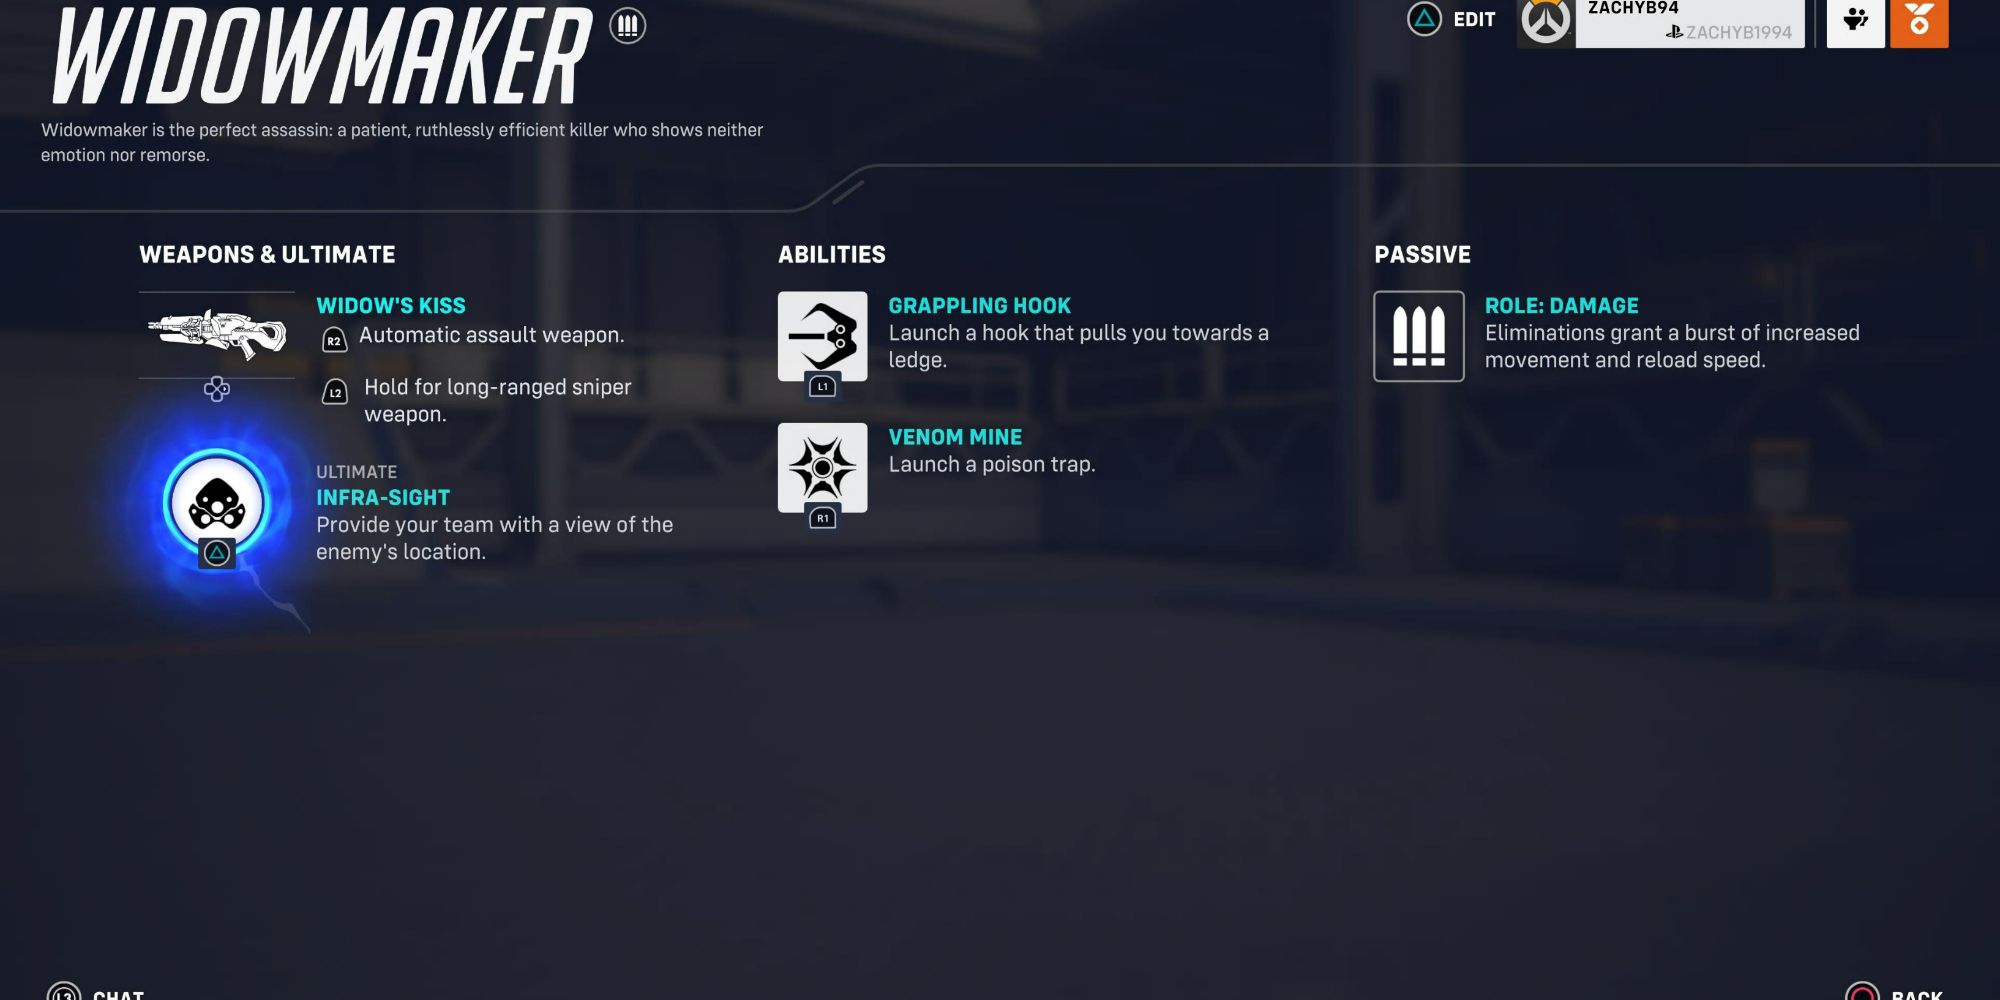 Widowmaker Weapon and Abilities Screen